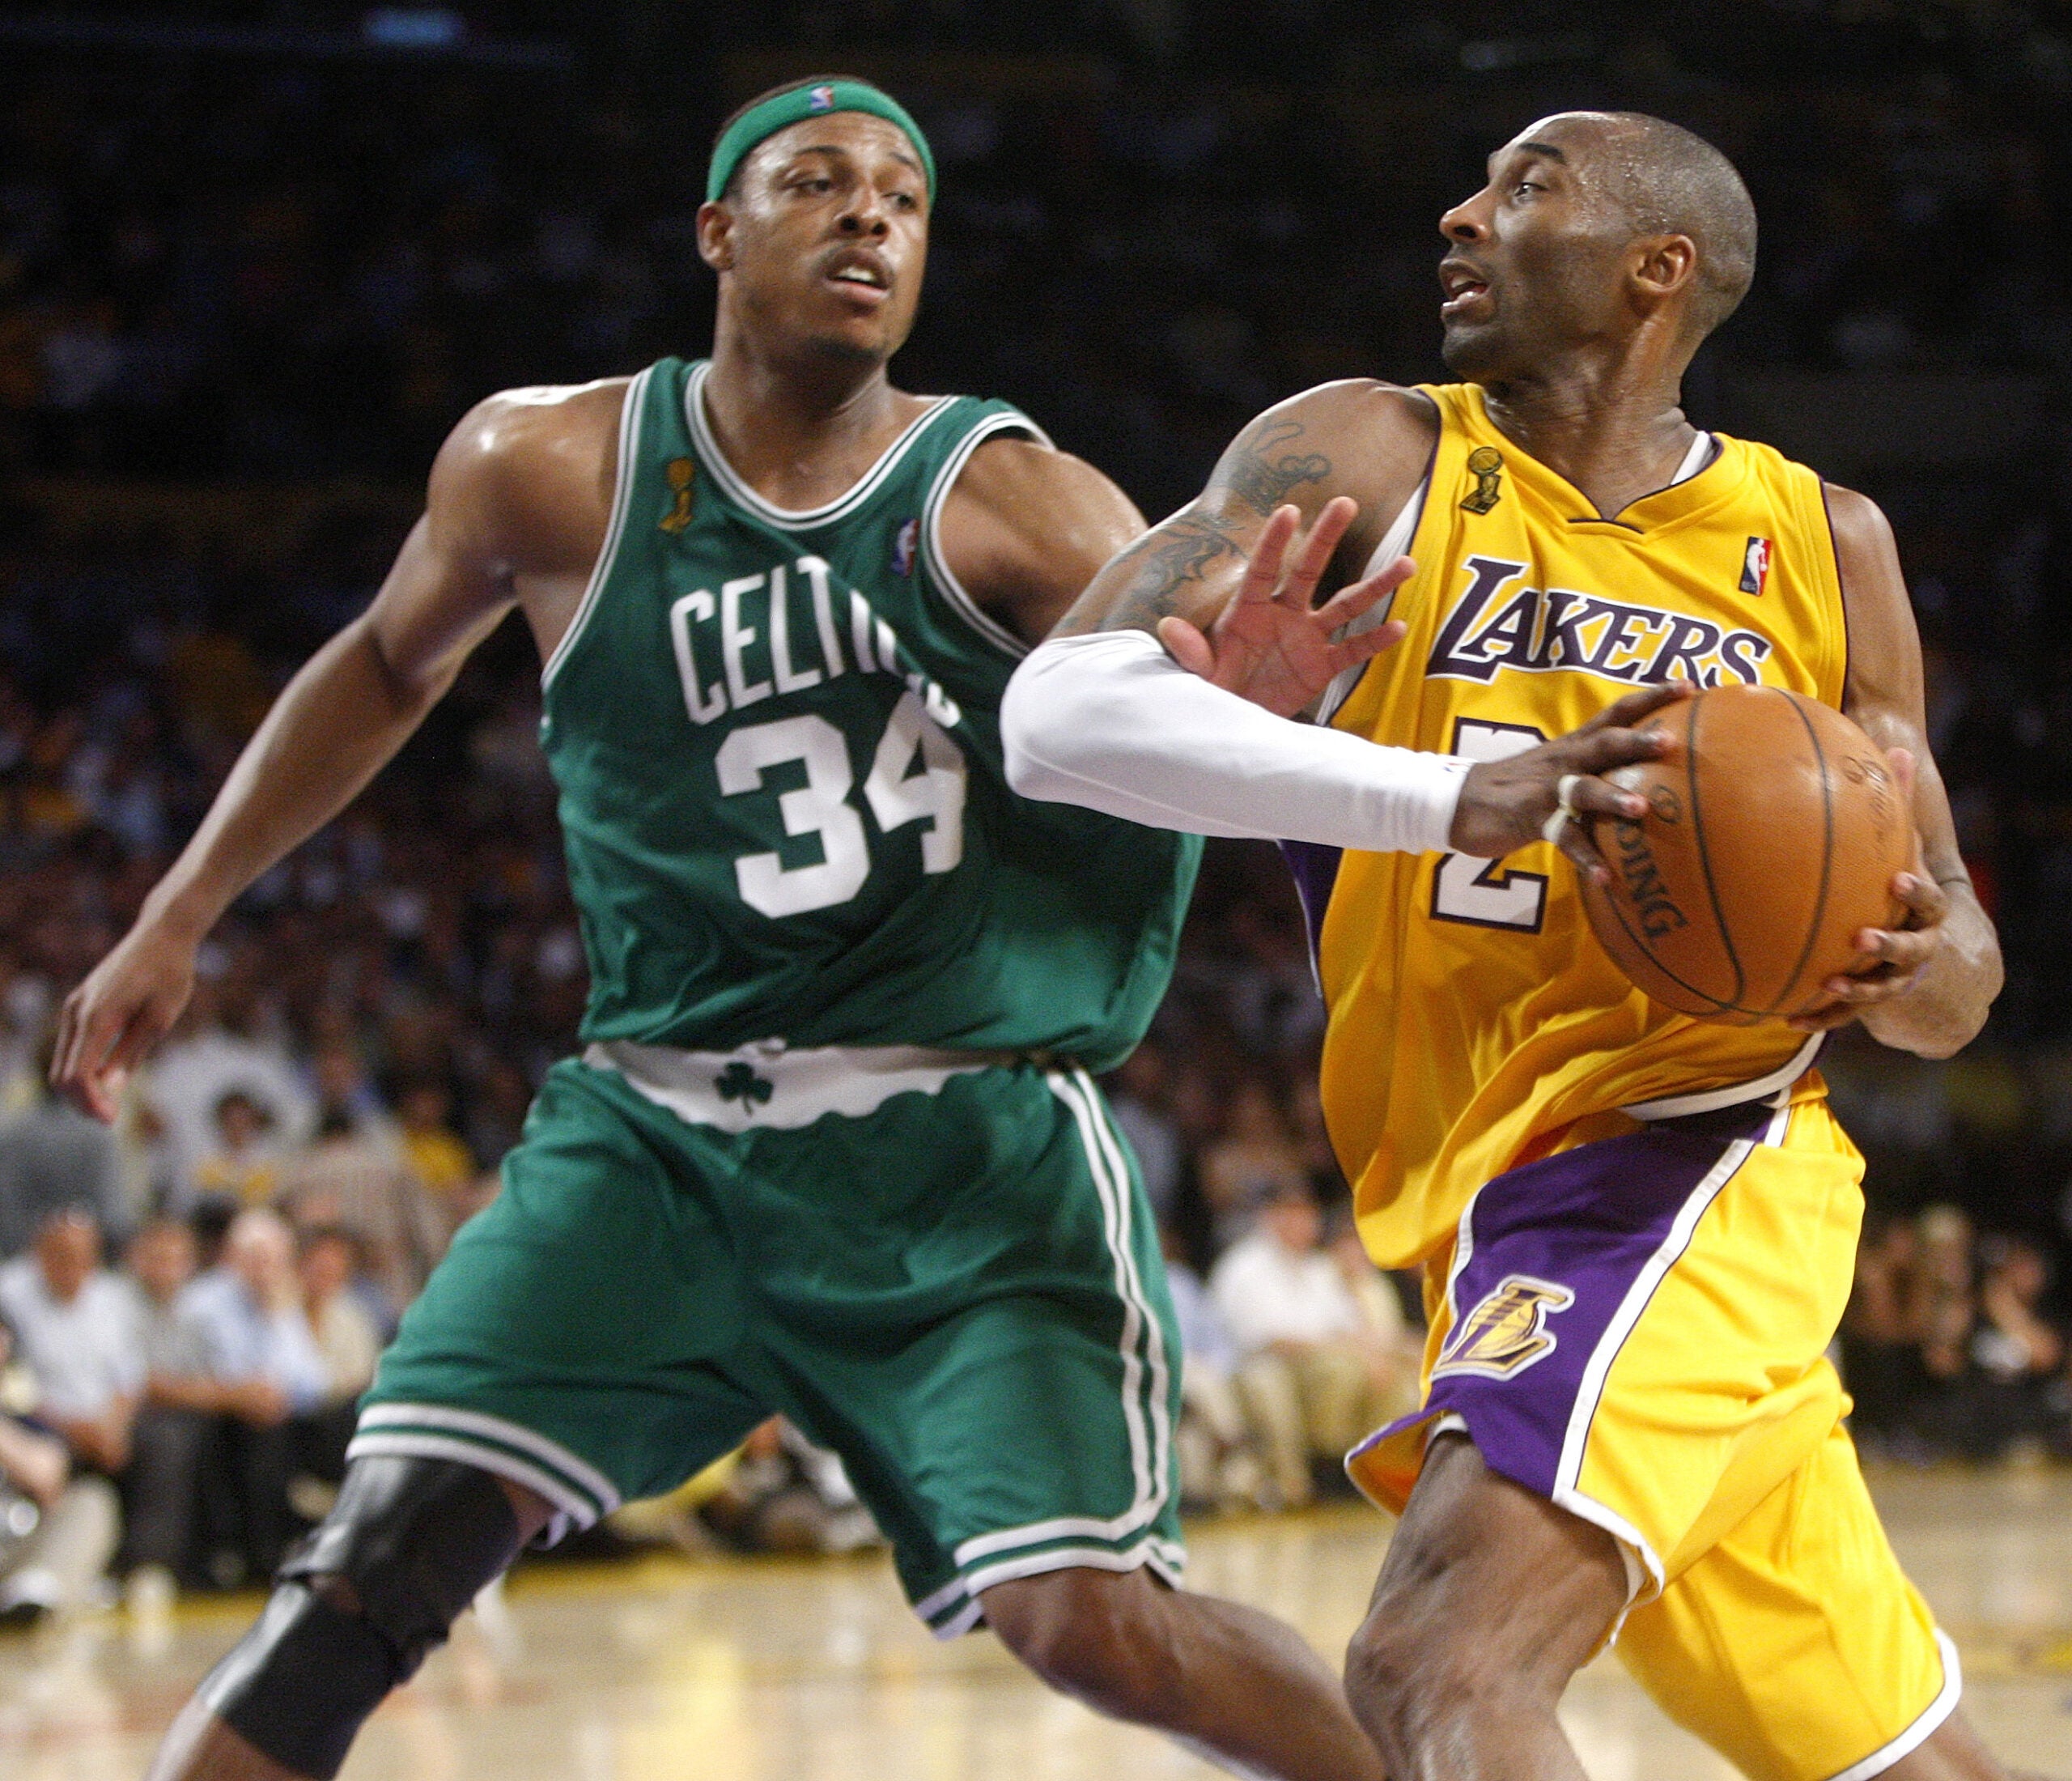 Ten Games to Remind Us That Celtics/Lakers is the NBA’s Best Rivalry